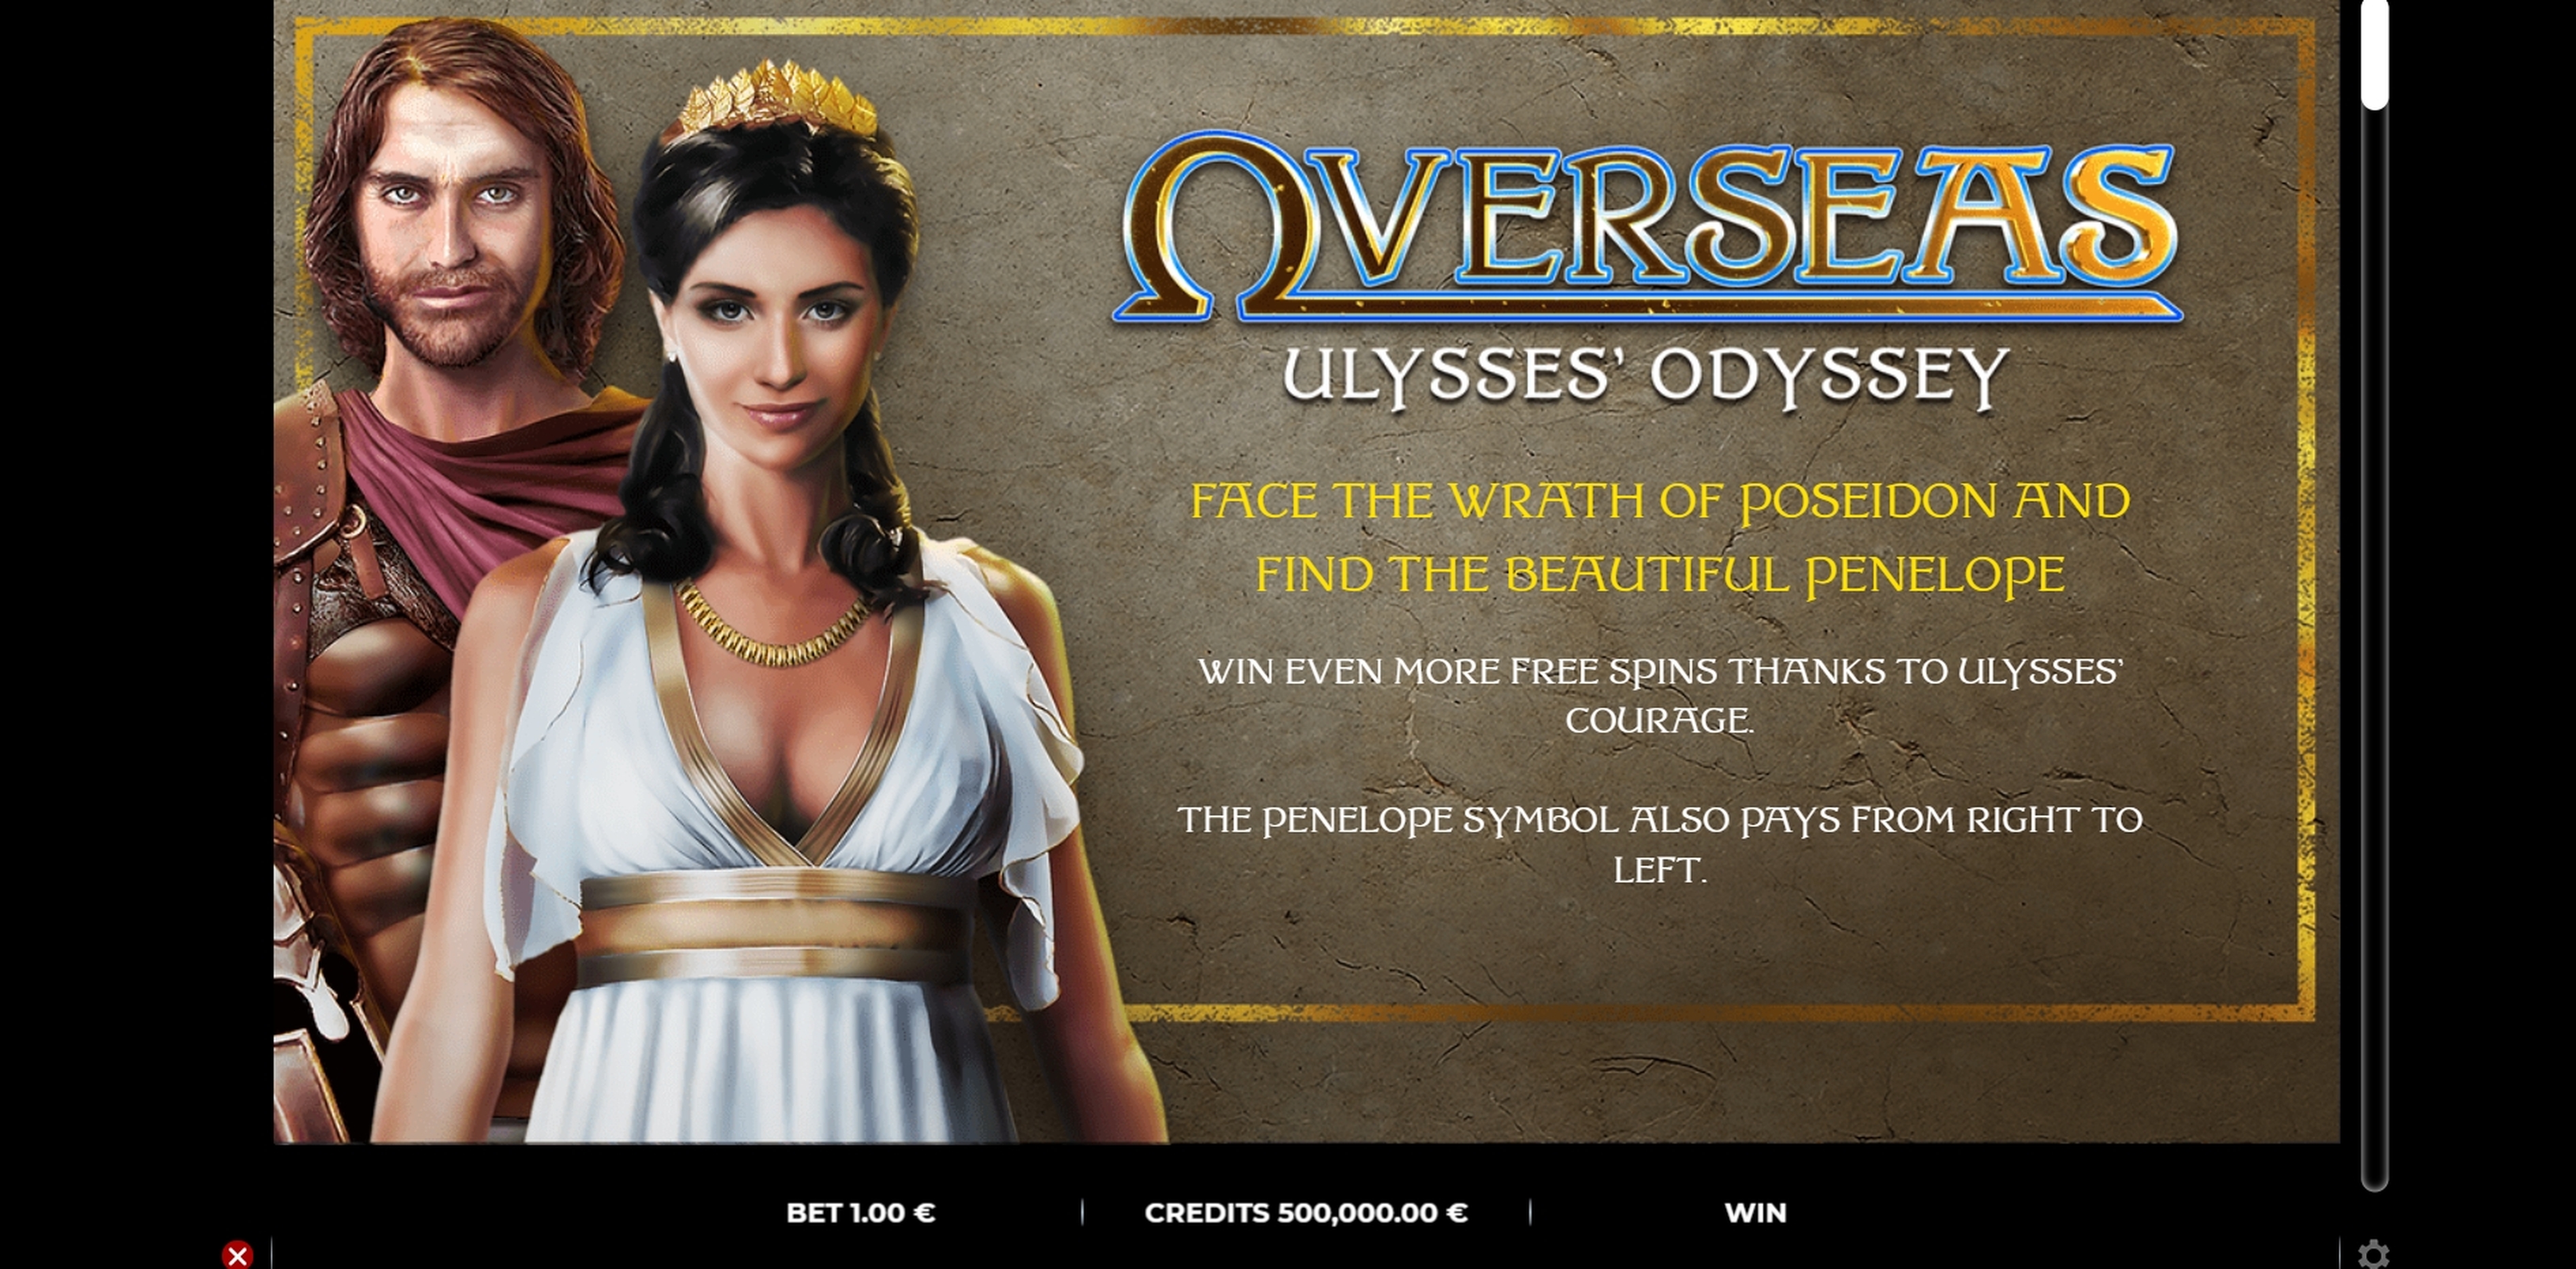 Info of Overseas Ulysses Odyssey Slot Game by GAMING1